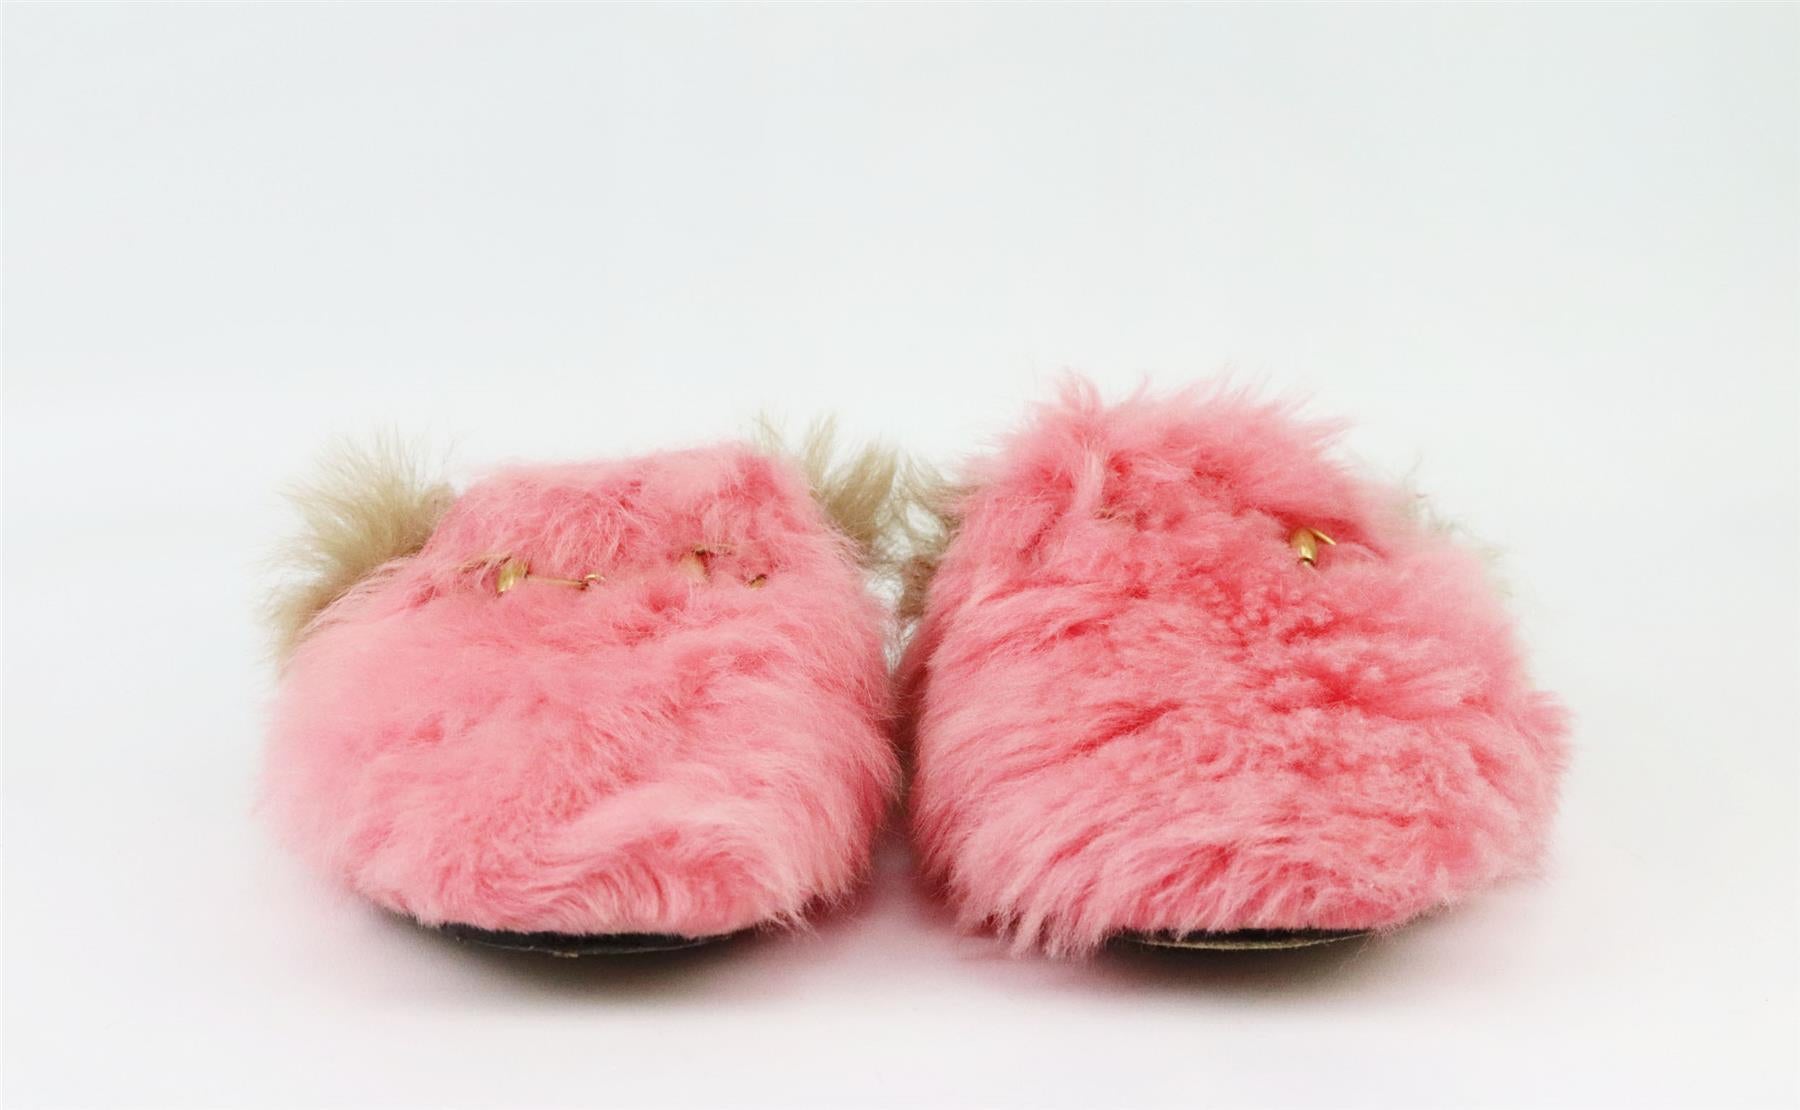 These ‘Princetown’ slippers by Gucci are one of the newest versions, crafted from fluffy pink shearling with a contrasting brown lining, the gold horsebit is a signature detail. Sole measures approximately 10 mm/ 0.5 inches. Pink shearling, brown